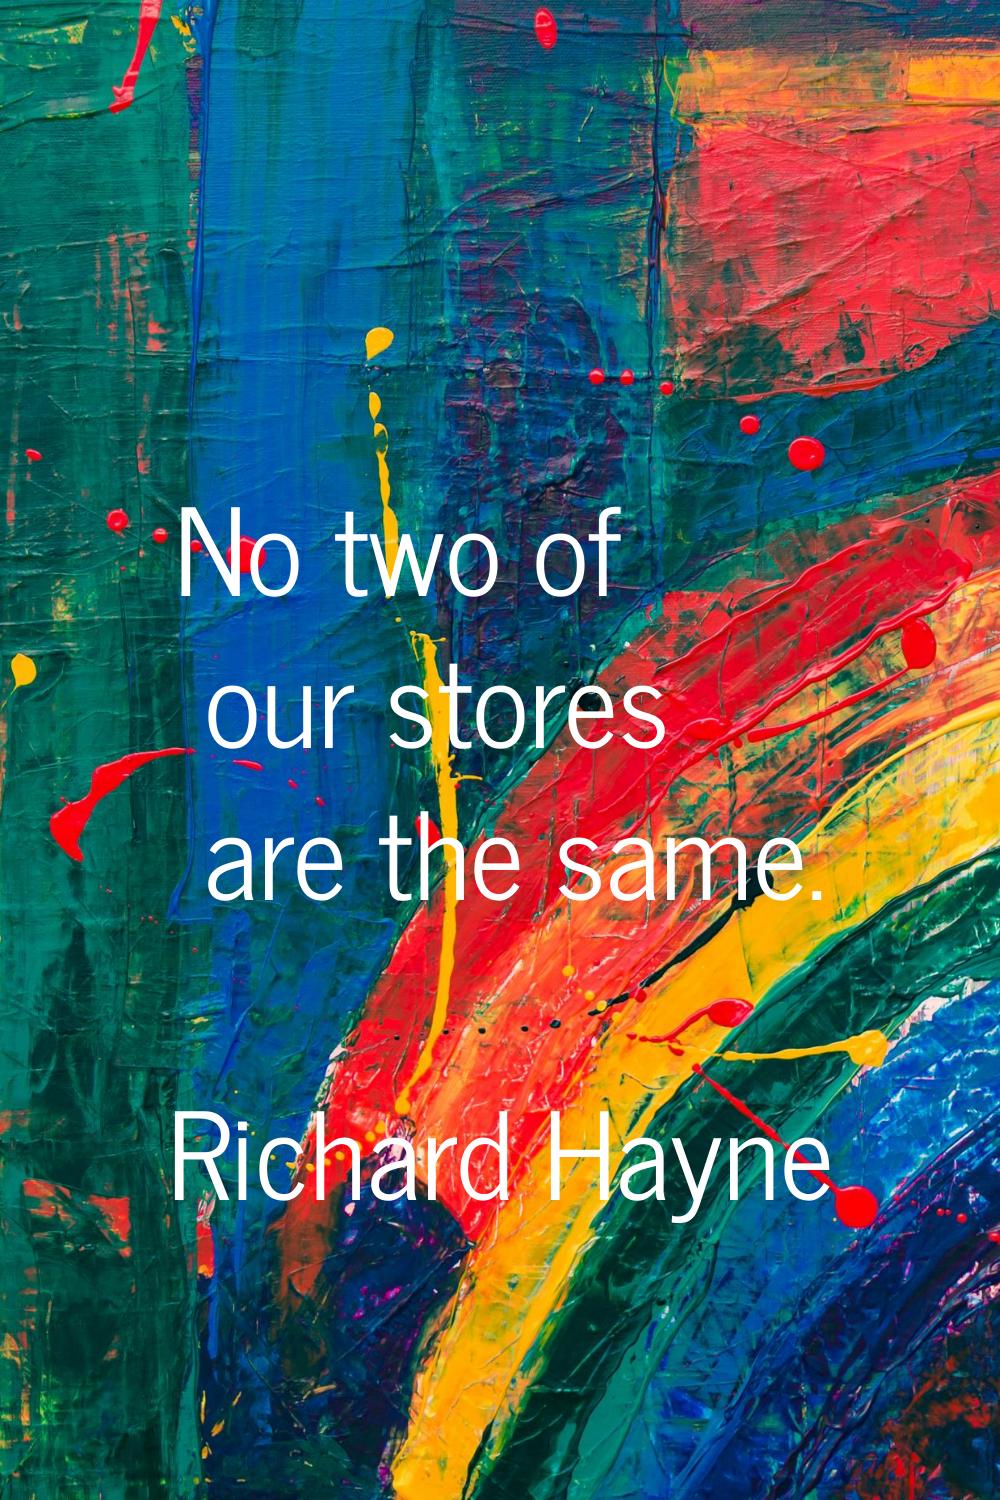 No two of our stores are the same.